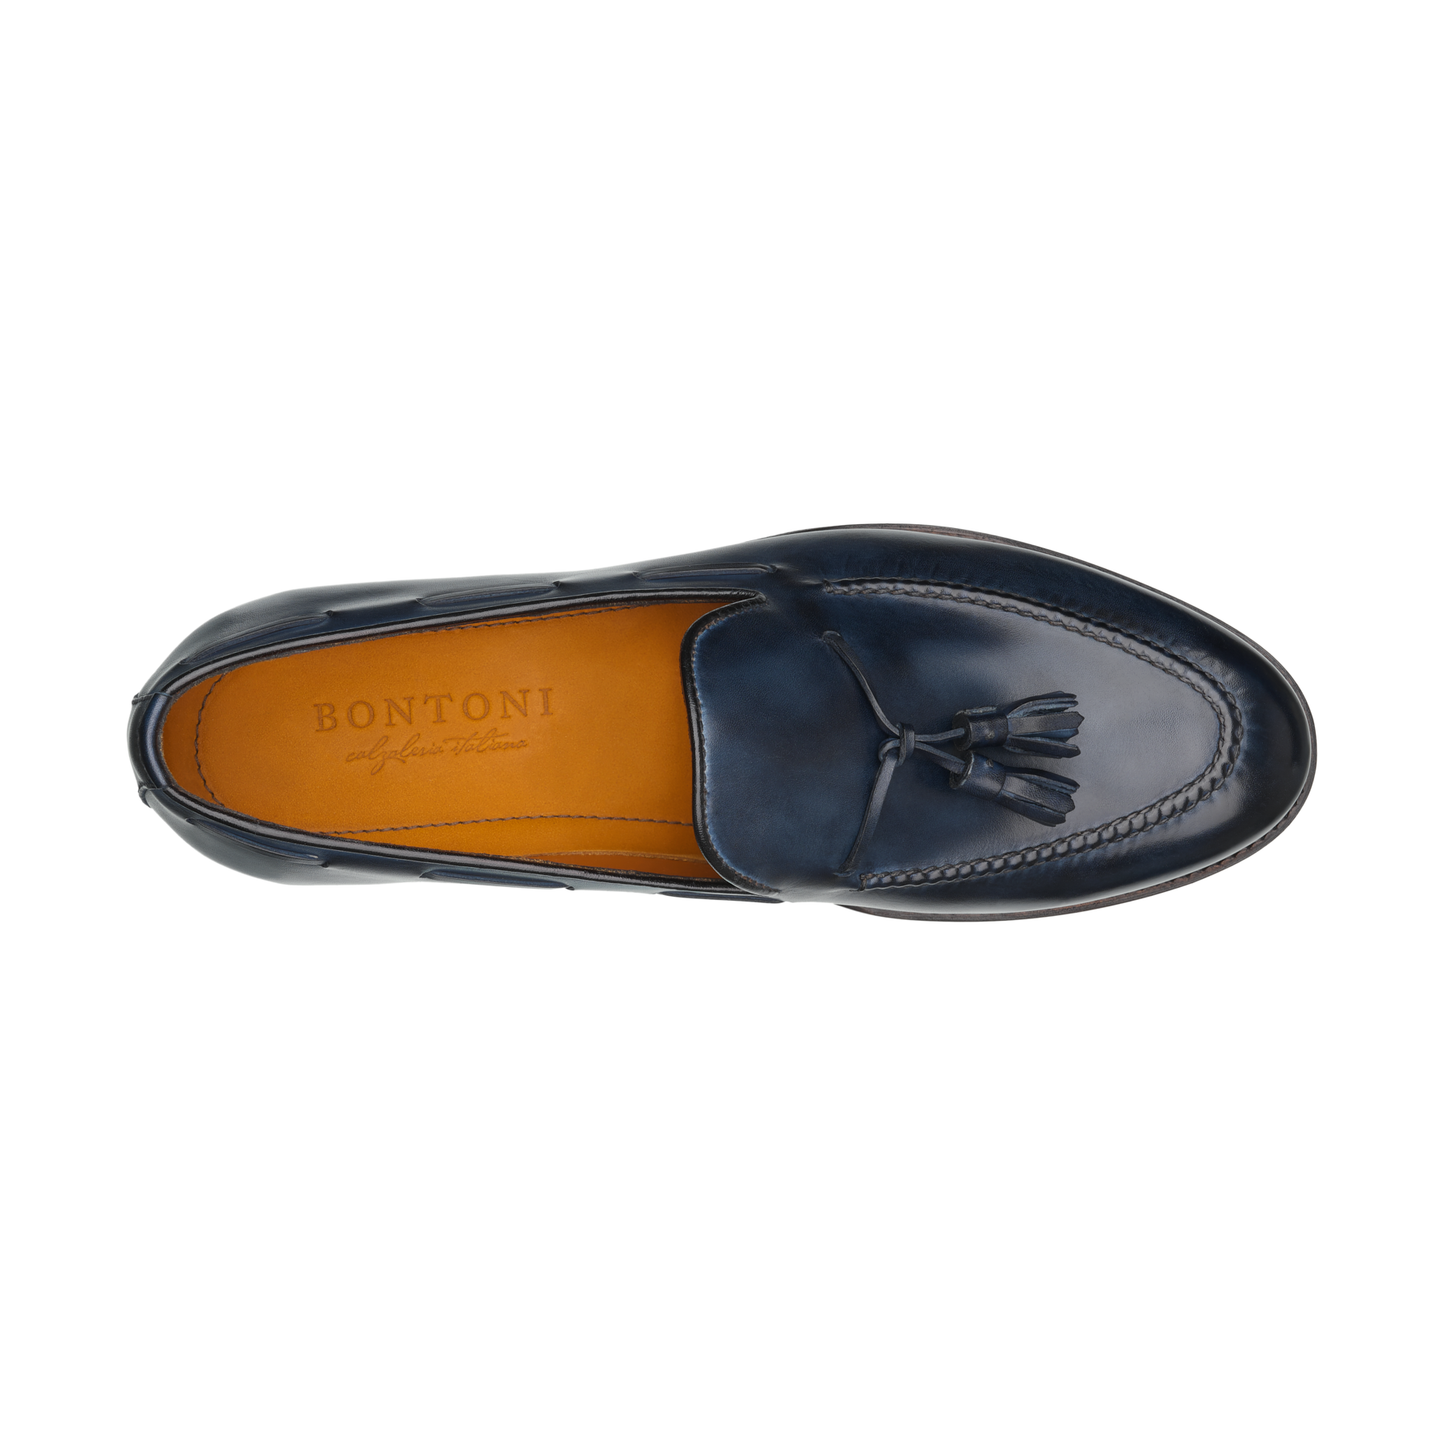 Bontoni «Conte Max Vintage» Leather Tassel Loafer with Hand-Stitched Apron in Blue - SARTALE